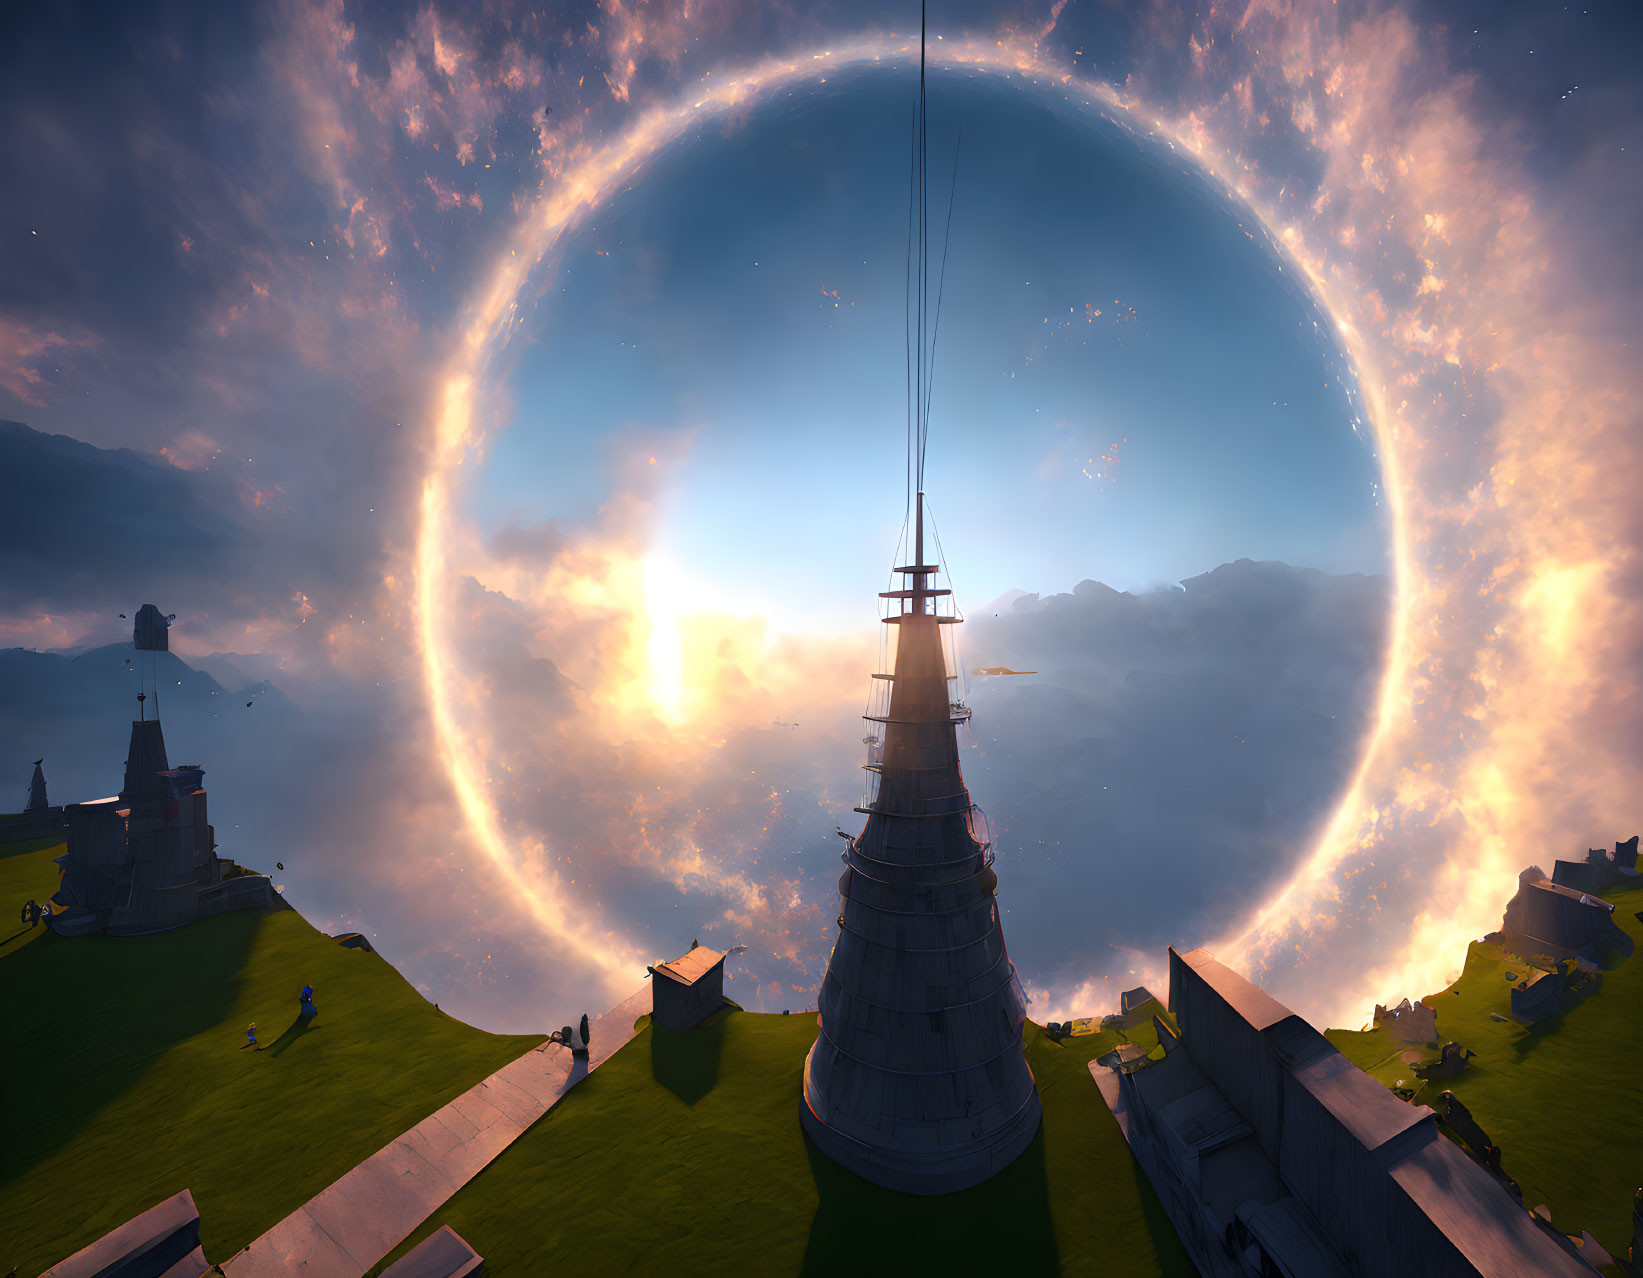 Fantastical landscape with towering spire, glowing ring, and alien planet at sunset